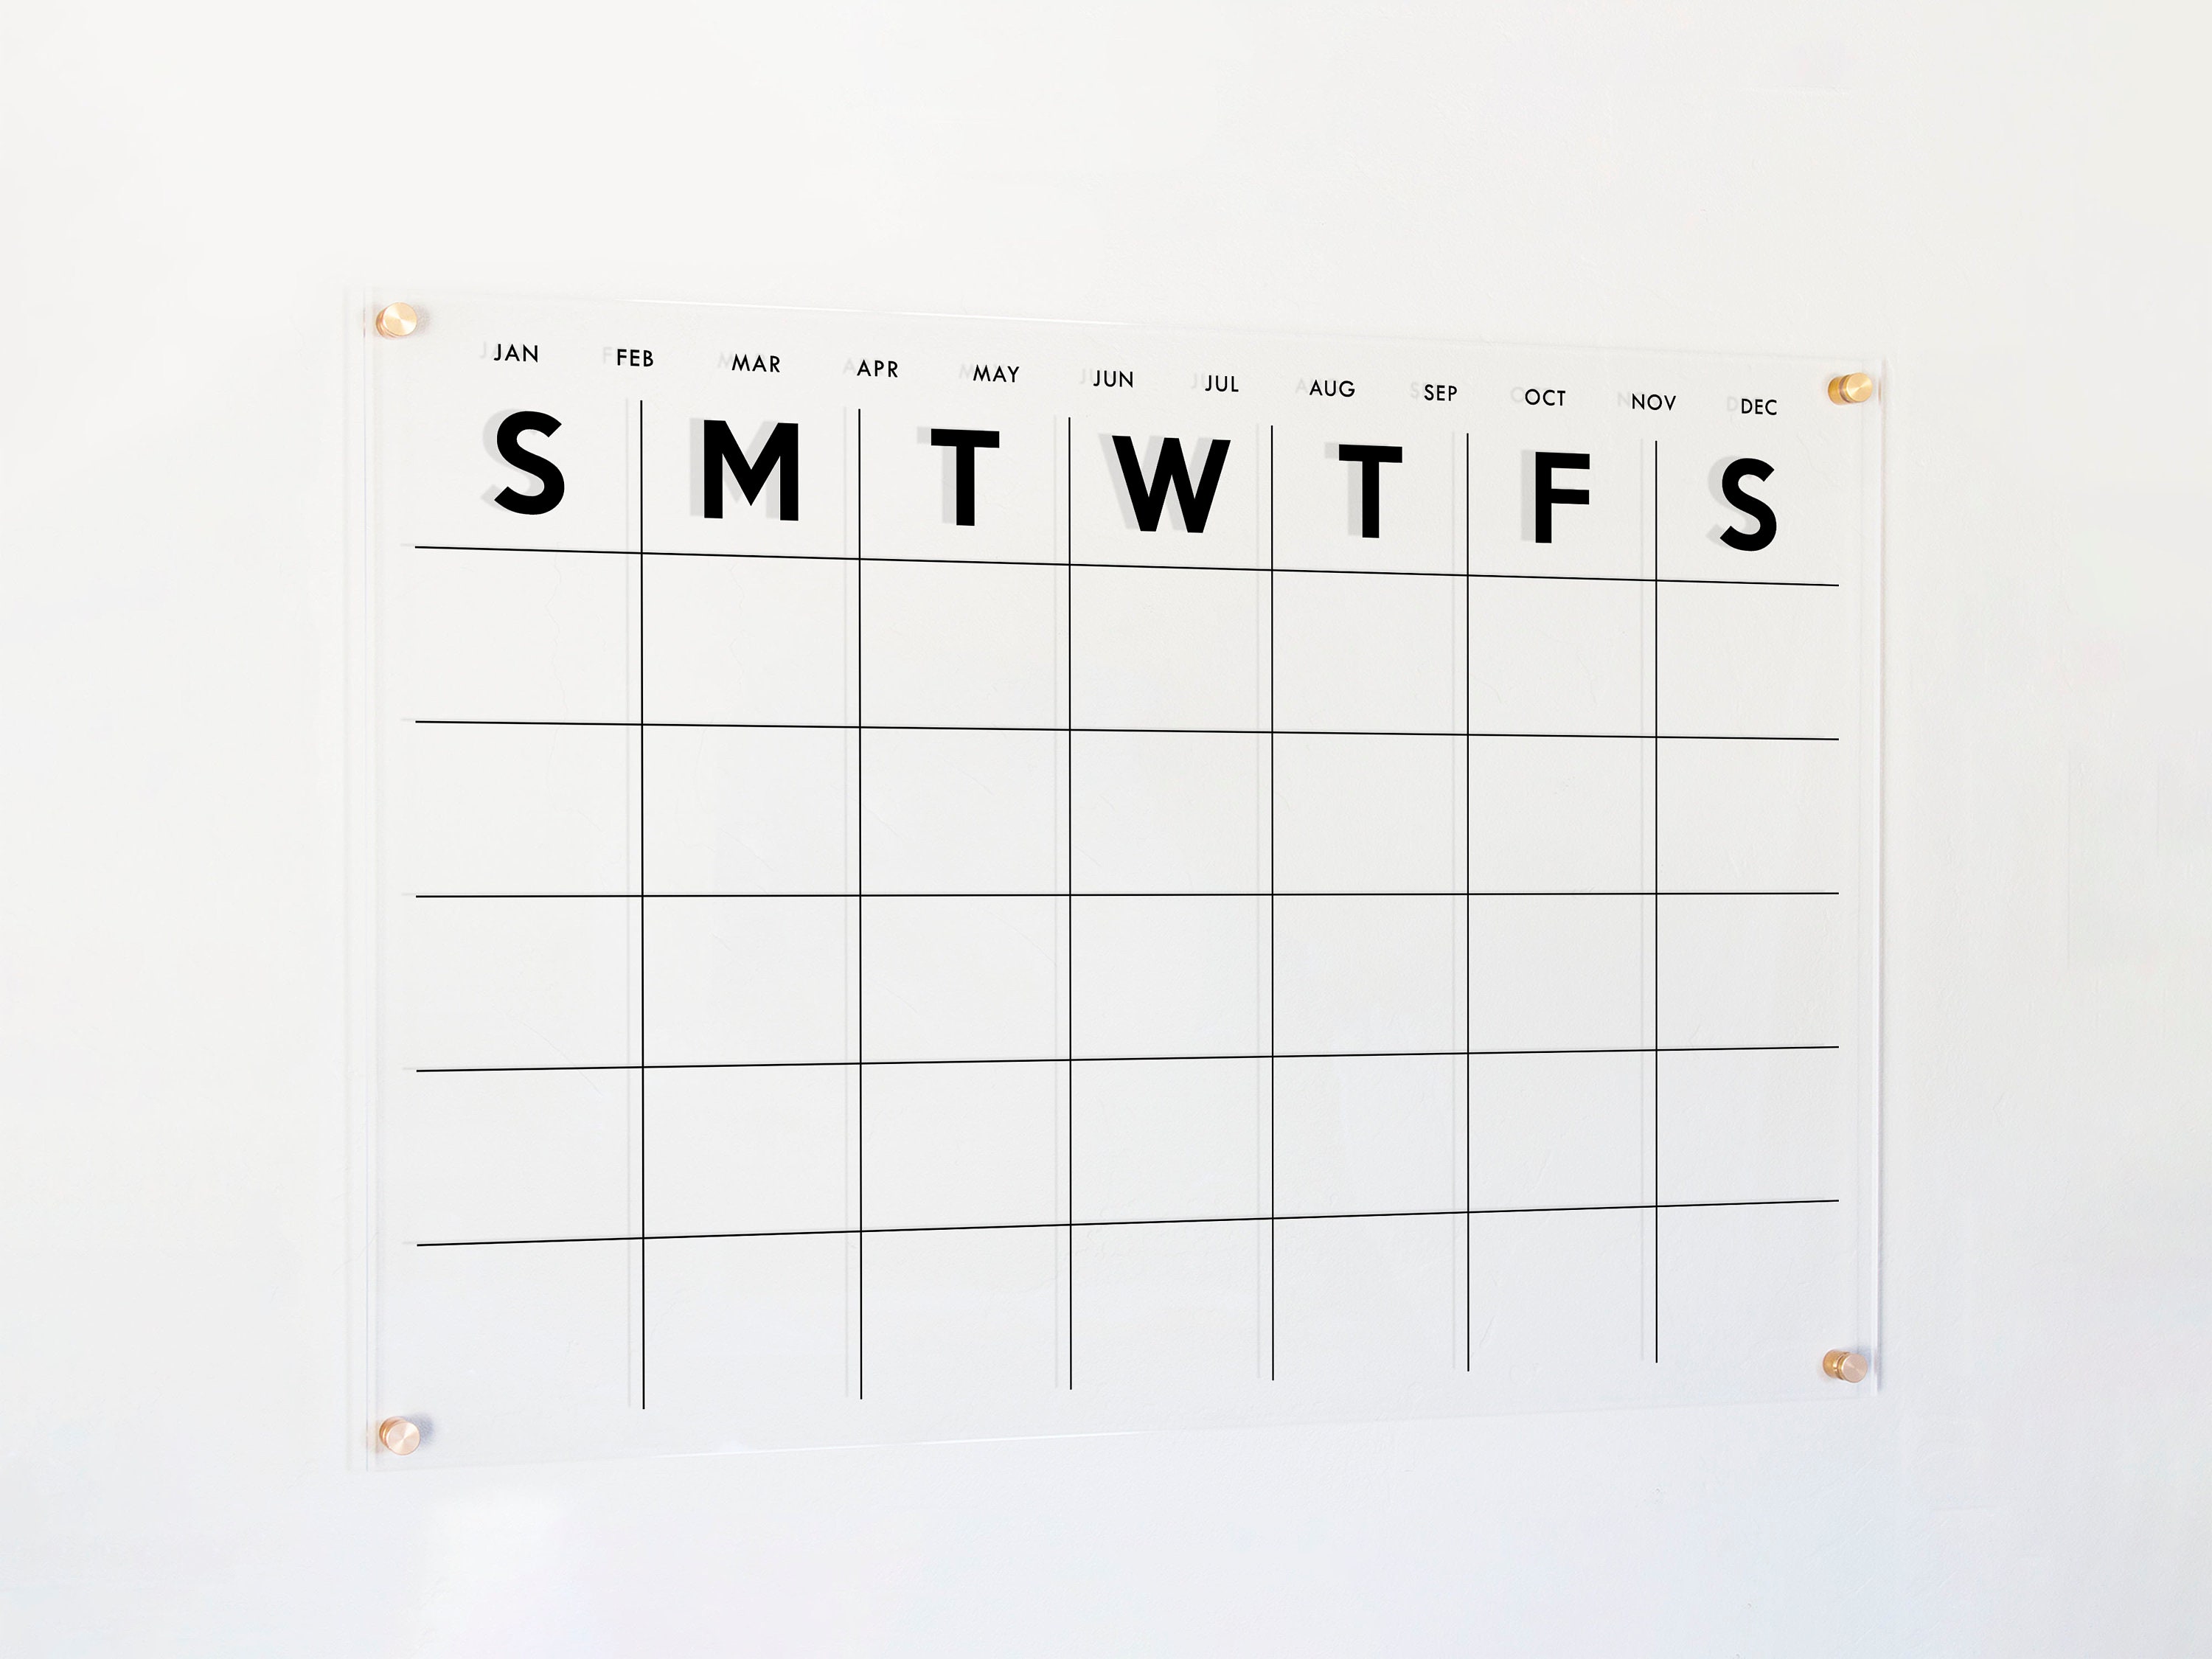 Stationery Organizer Drawers Craft Storage Cabinet Wall Acrylic Weekly Planner Board Clear Dry Erases Calendar Planner Reusable Weekly Daily to Do